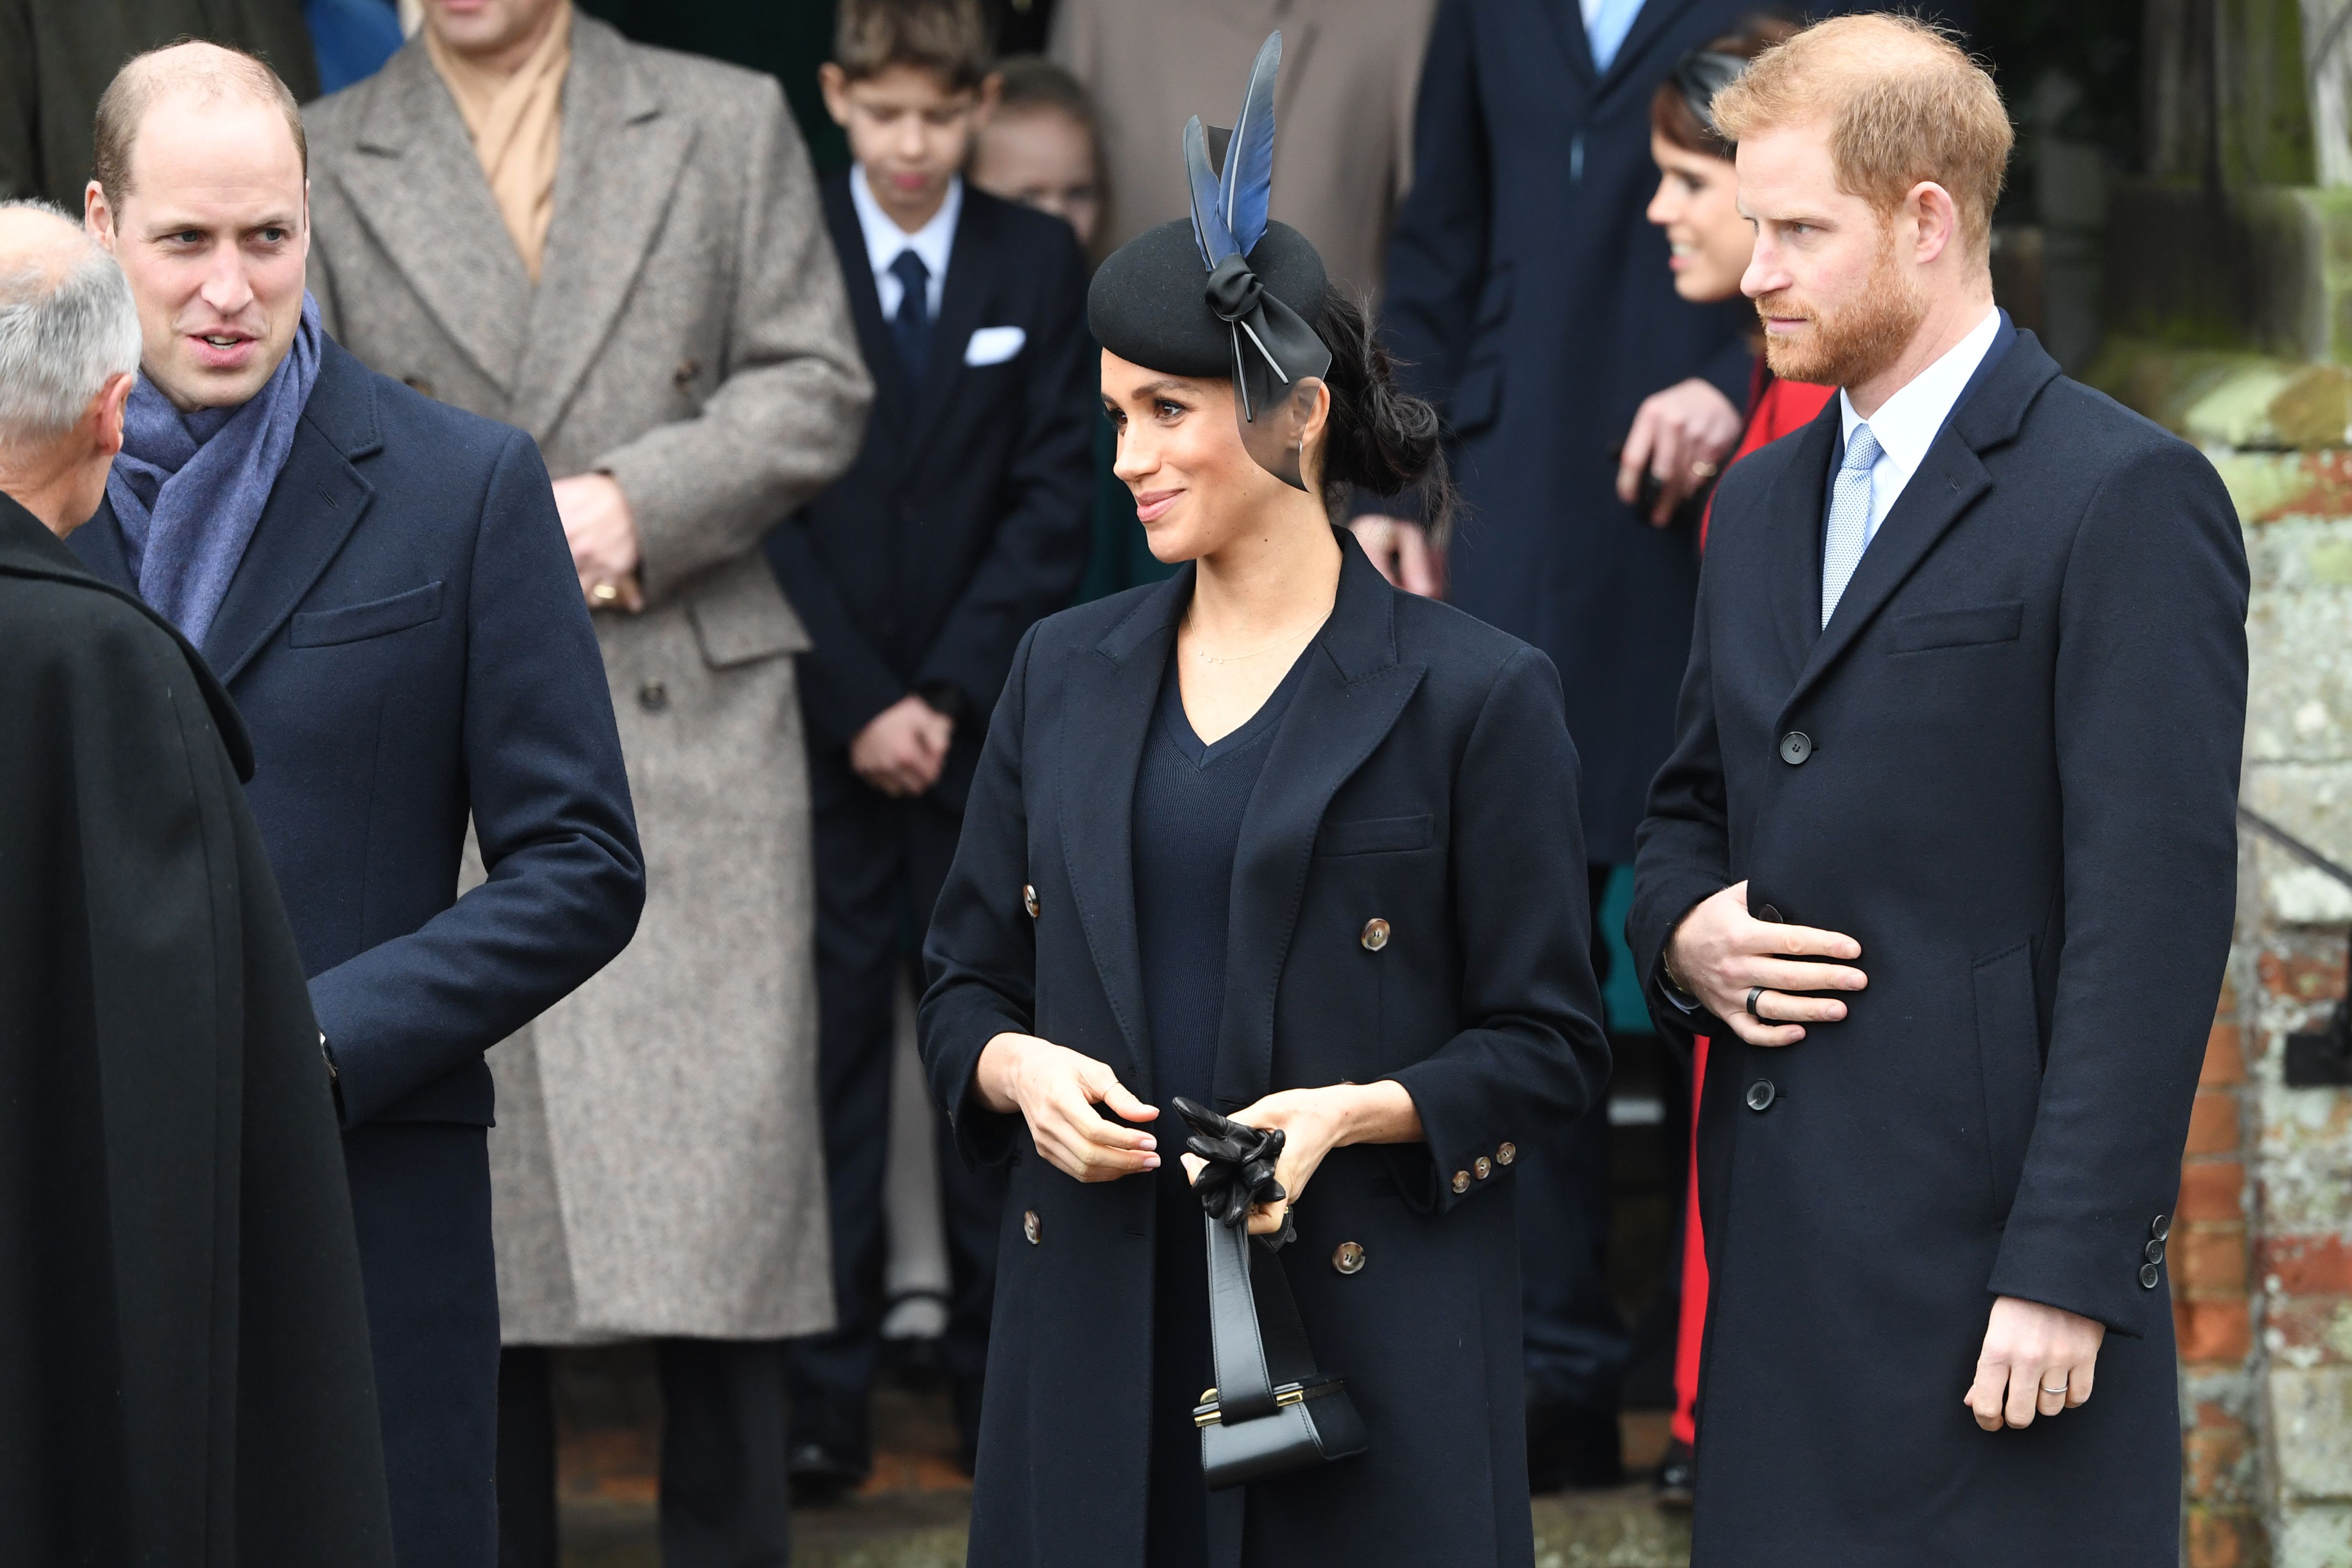 Prince William, Meghan Markle and Prince Harry pictured leaving after the Royal Family's traditional Christmas Day service at St Mary Magdalene Church in Sandringham on December 25, 2018 in Norfolk, England. / Source: Getty Images